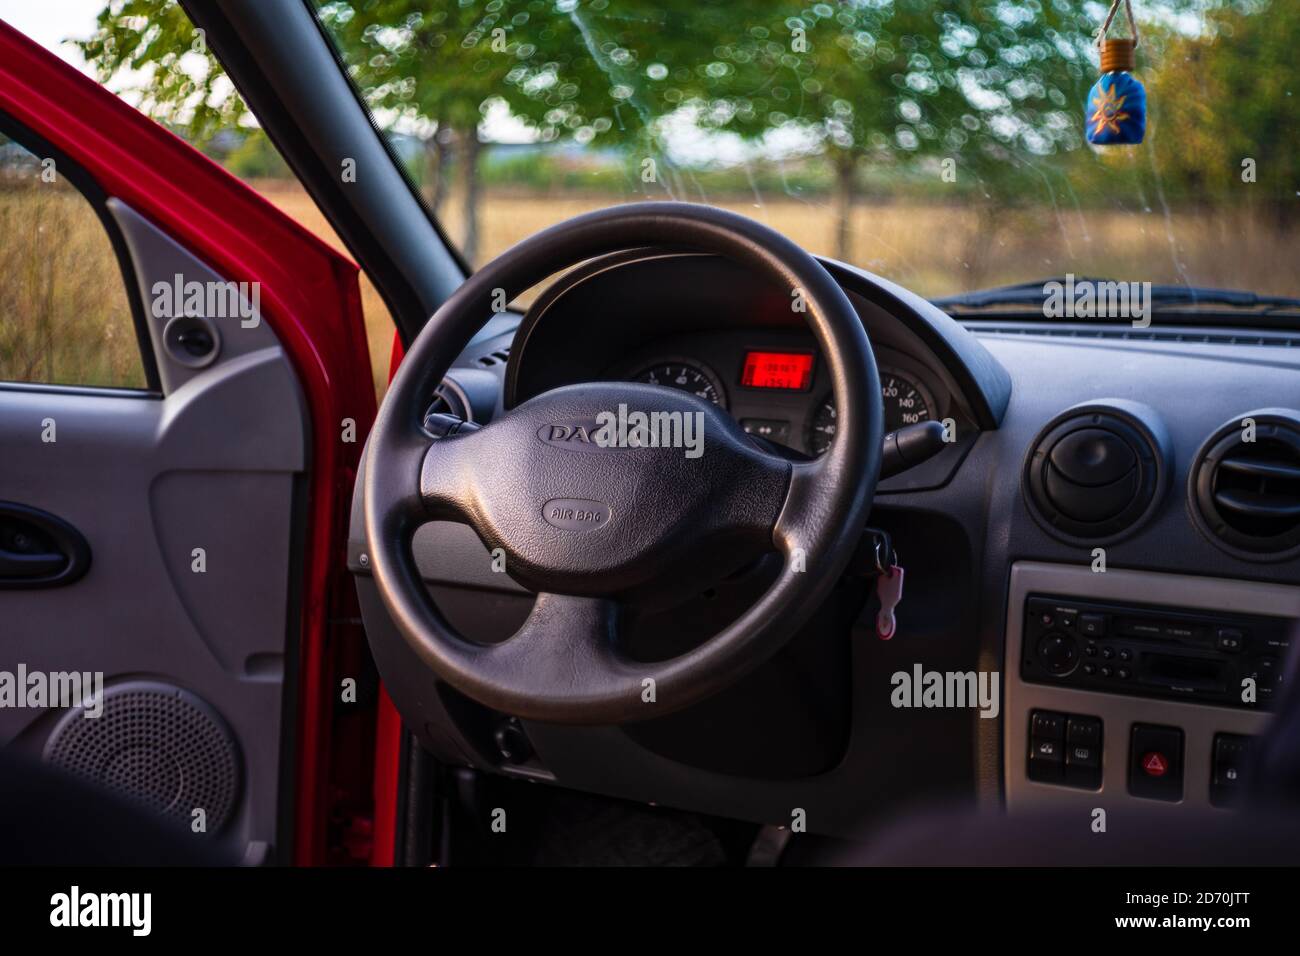 Interior of Dacia Logan, car dashboard close up of steering wheel with air bag sign. Bucharest, Romania, 2020 Stock Photo